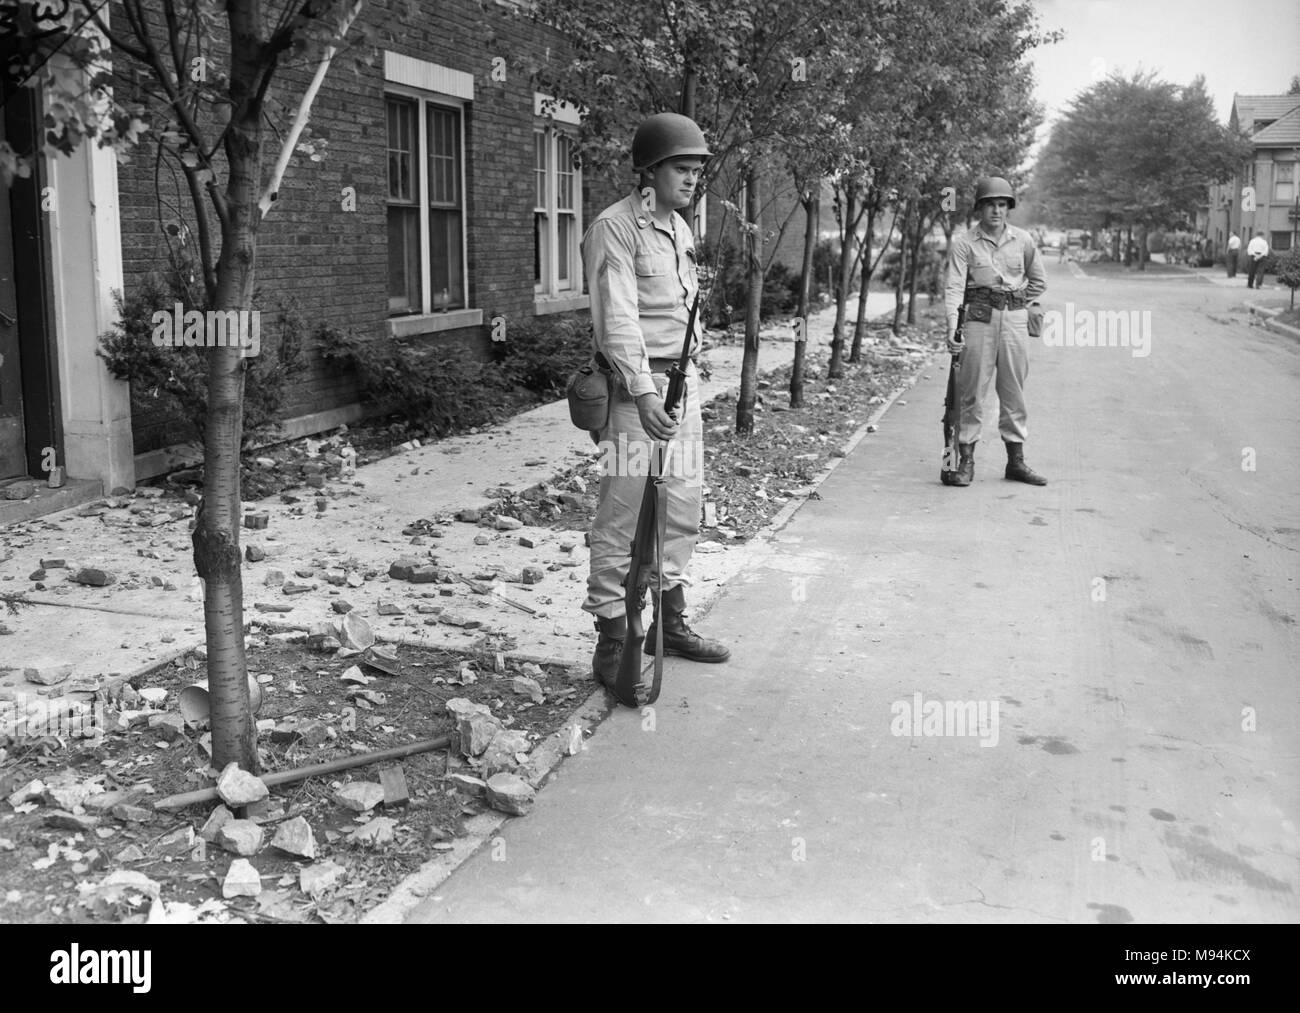 National Guard troops stand guard in a Cicero, Illinois neighborhood in 1951 to quell violence after African-Americans moved in. Stock Photo